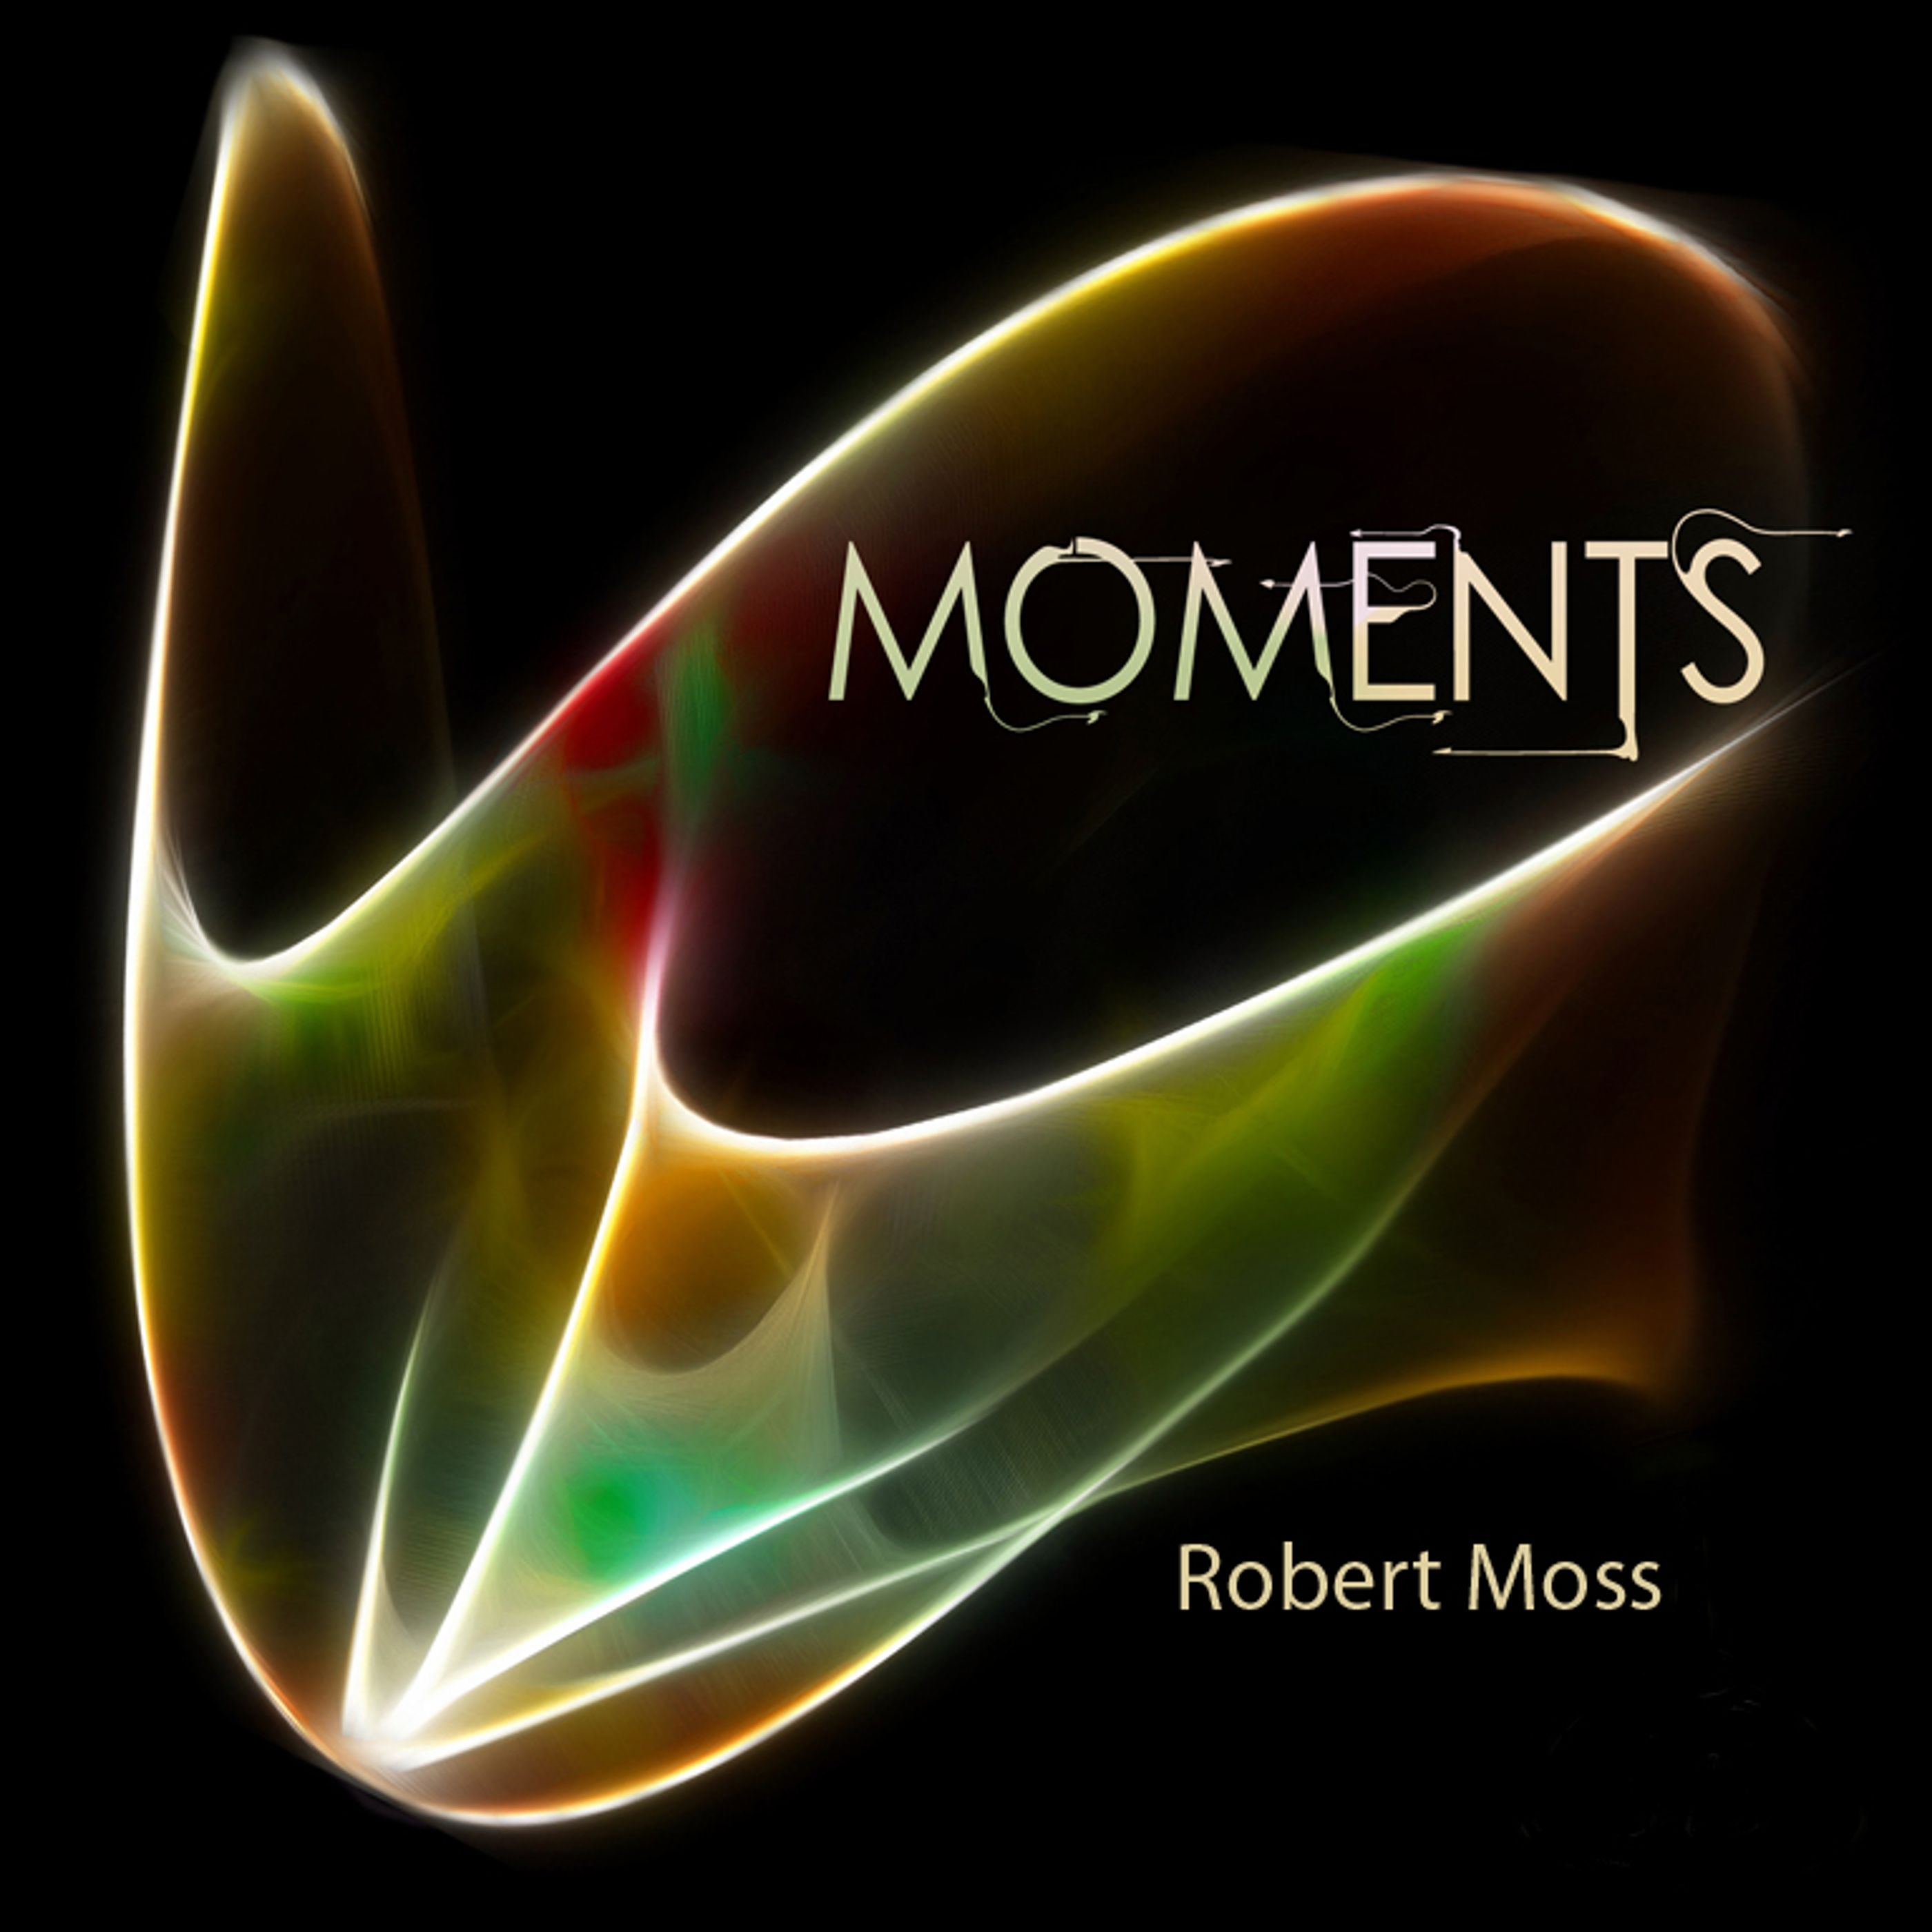 Moments is released through the Grey Area Sound label: OIL